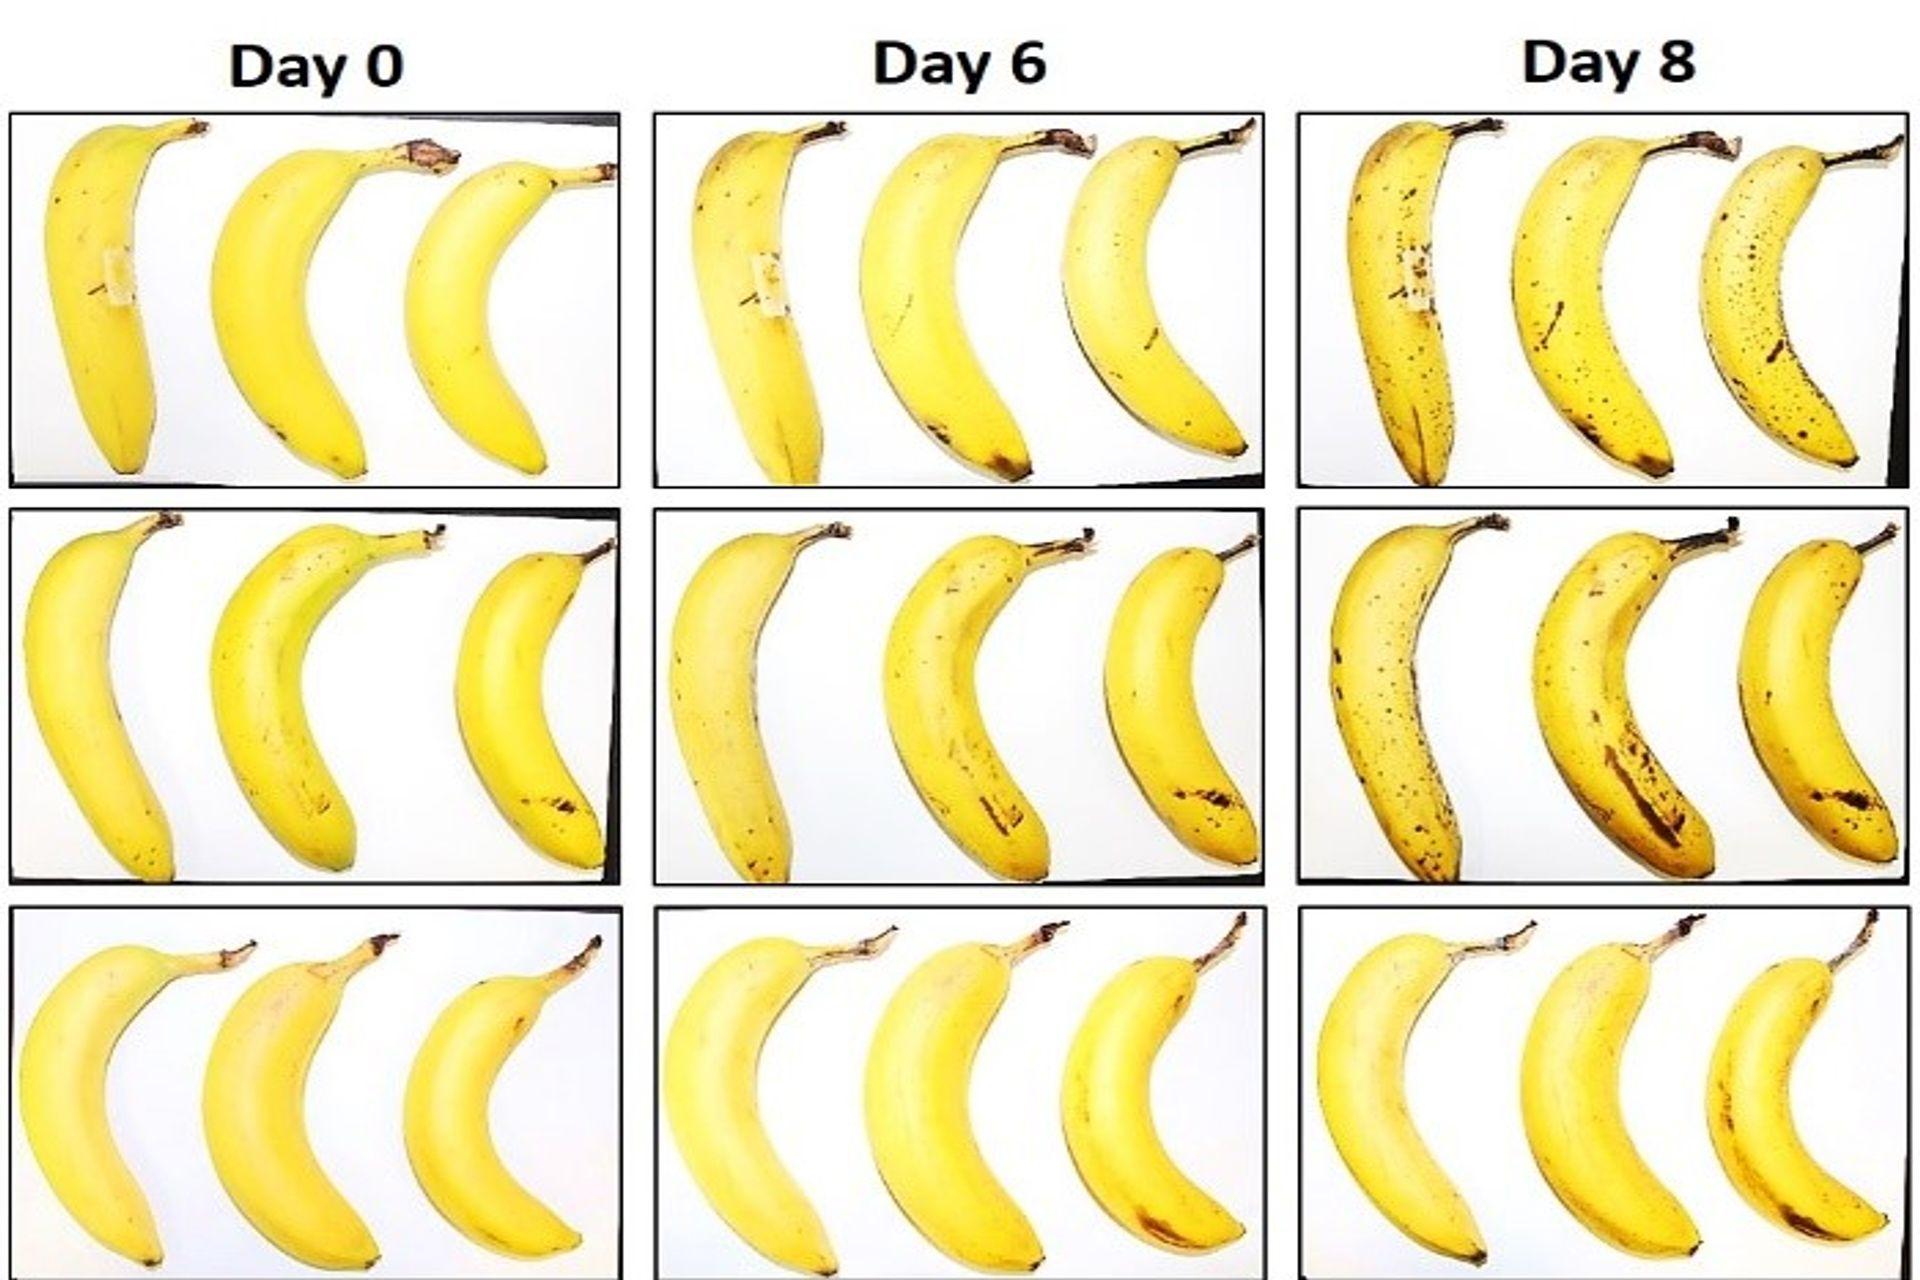 Three bananas subjected by EMPA and Lidl Switzerland to the conservation test with and without fibrous cellulose wrapping after zero, 6 and 8 days